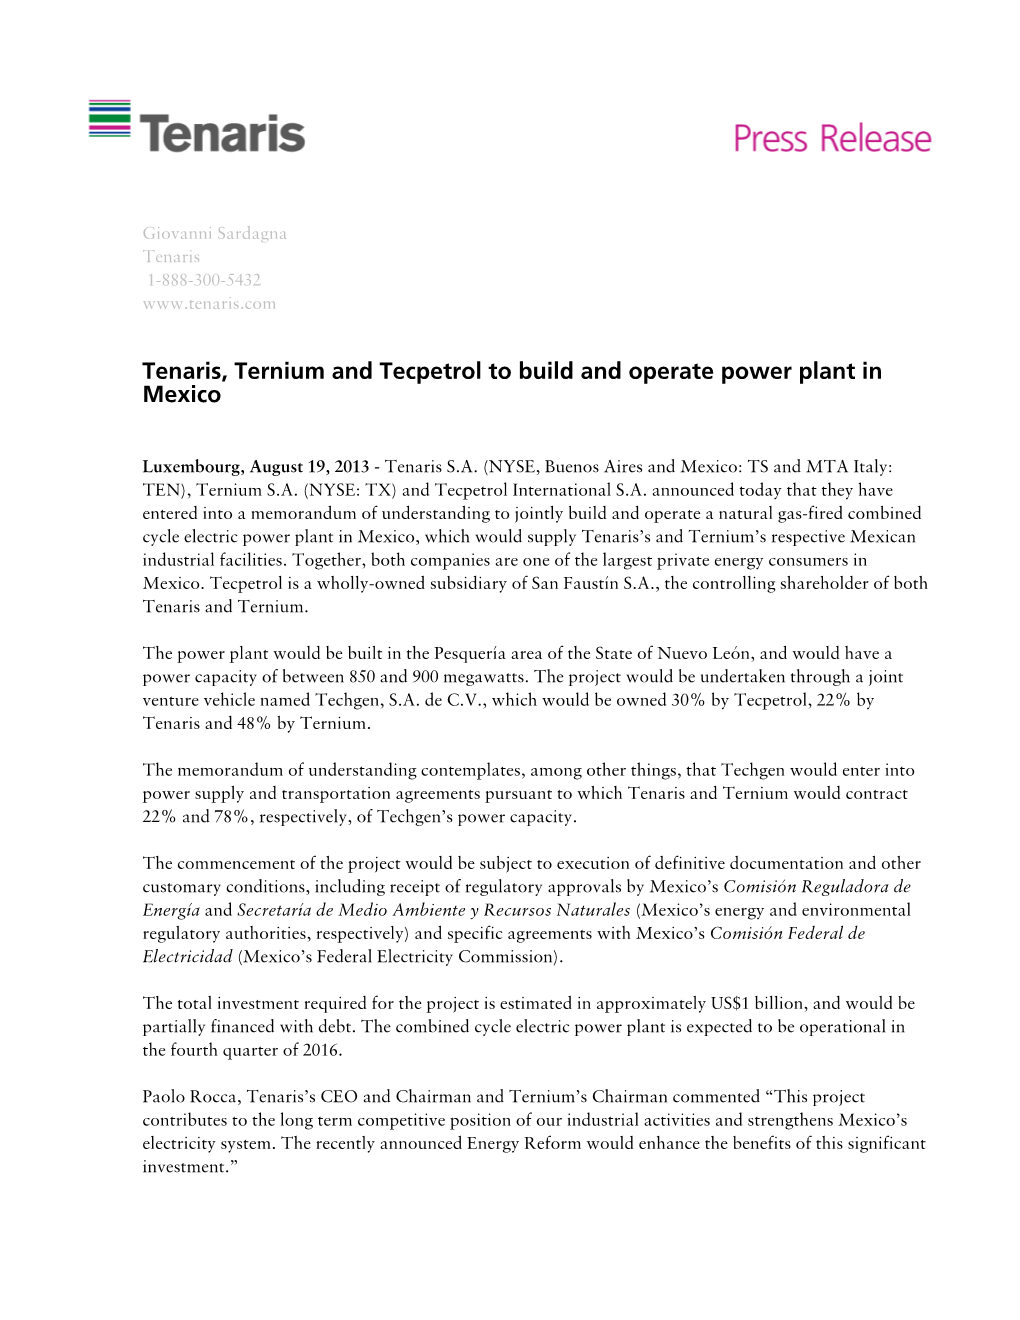 Tenaris, Ternium and Tecpetrol to Build and Operate Power Plant in Mexico